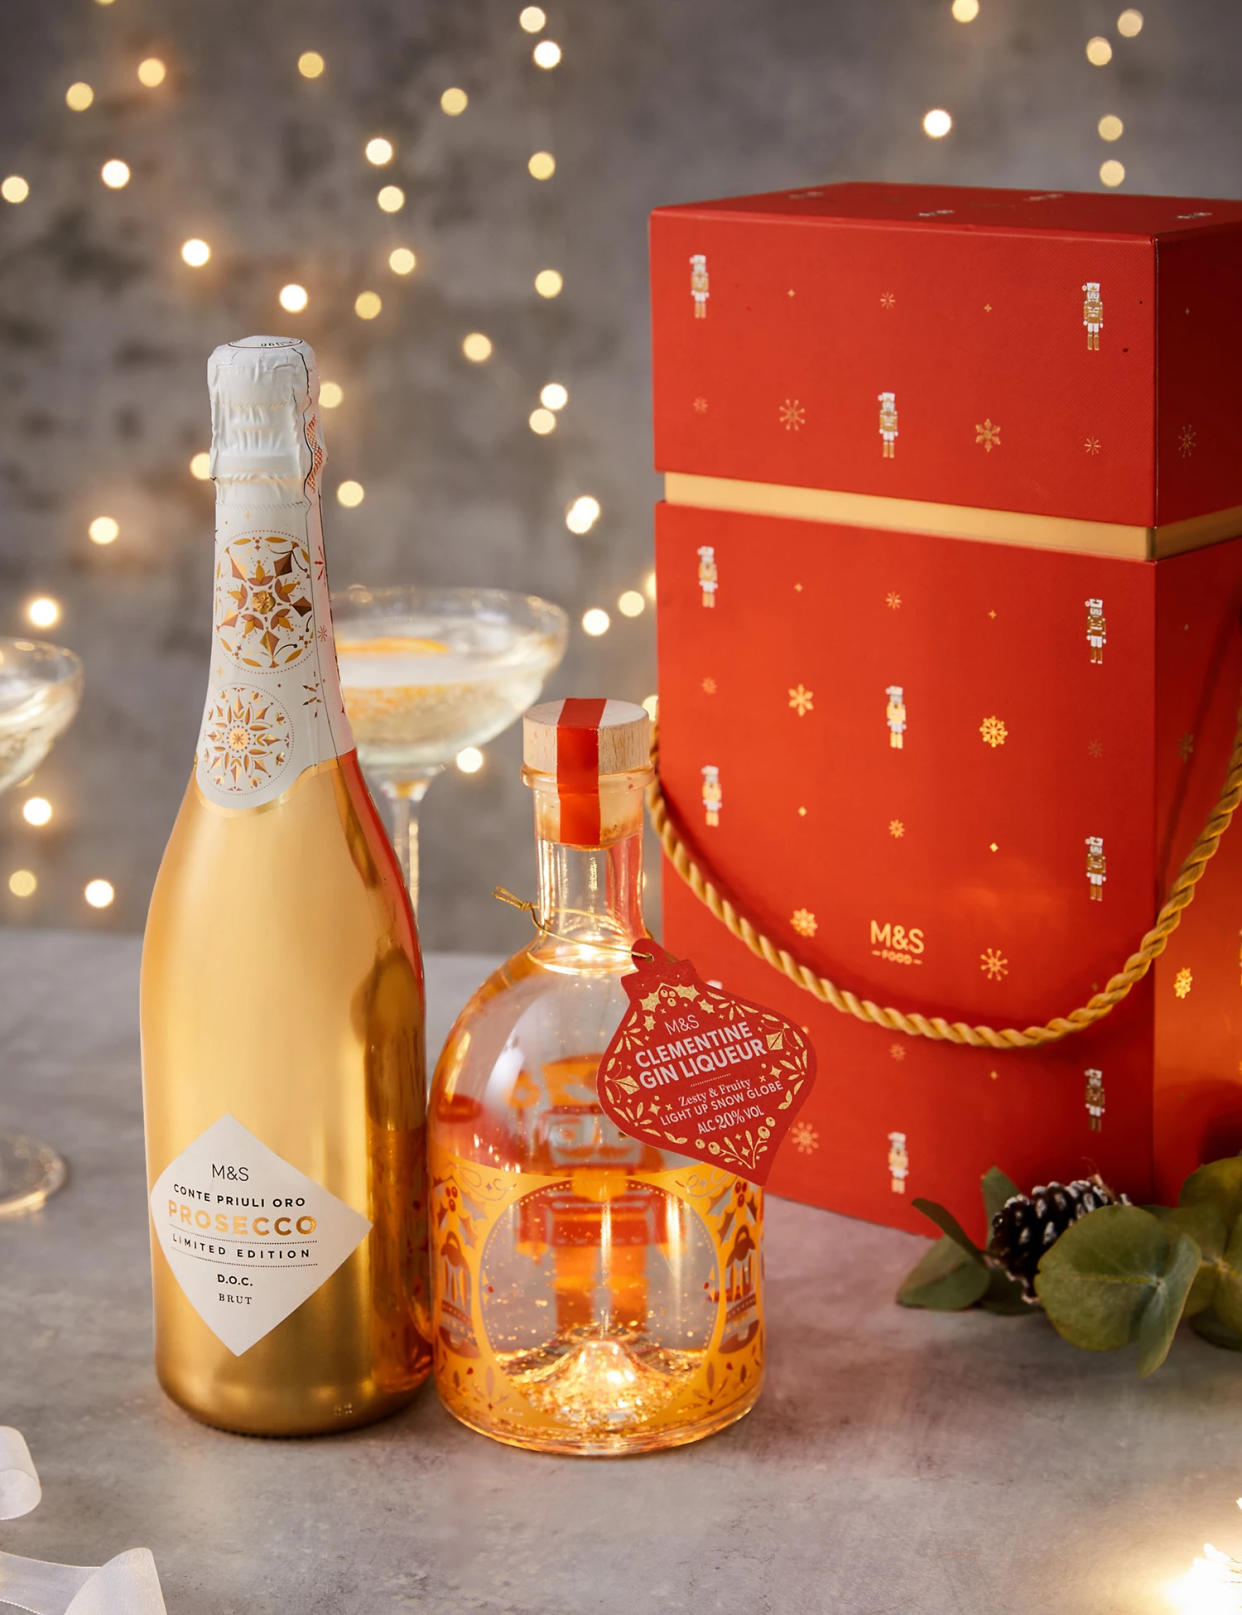 You can pre-order the popular festive tipple online now. (Marks & Spencer)